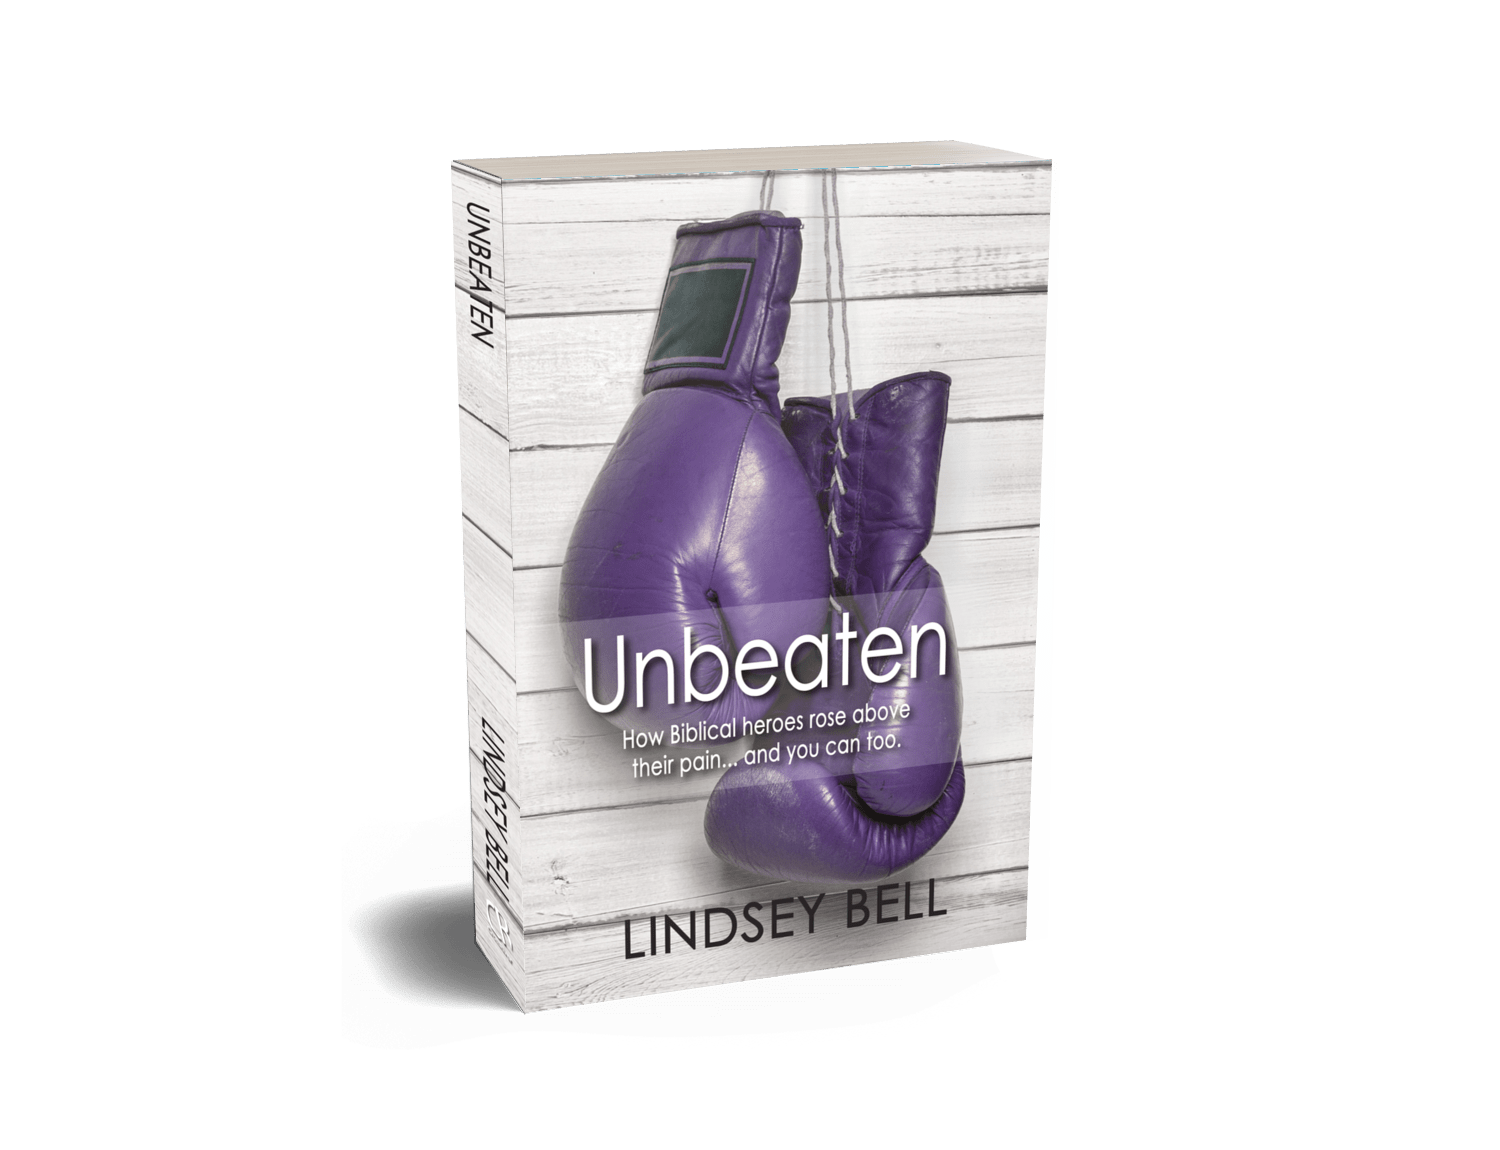 Unbeaten - How biblical characters rose above their pain and you can too - by Lindsey Bell, released by Christian book publisher, CrossRiver Media